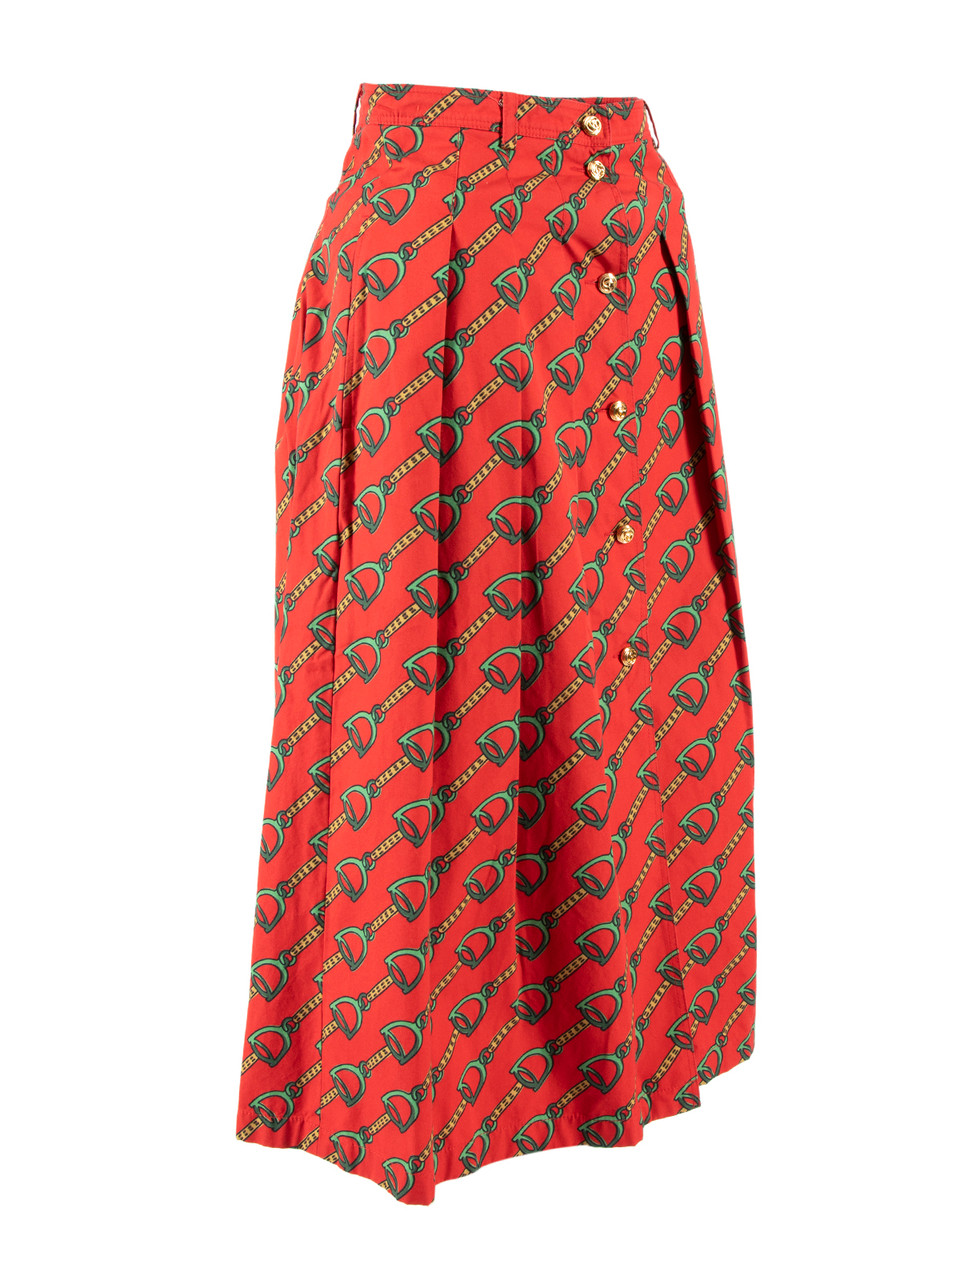 Gucci Patterned Button Down Skirt